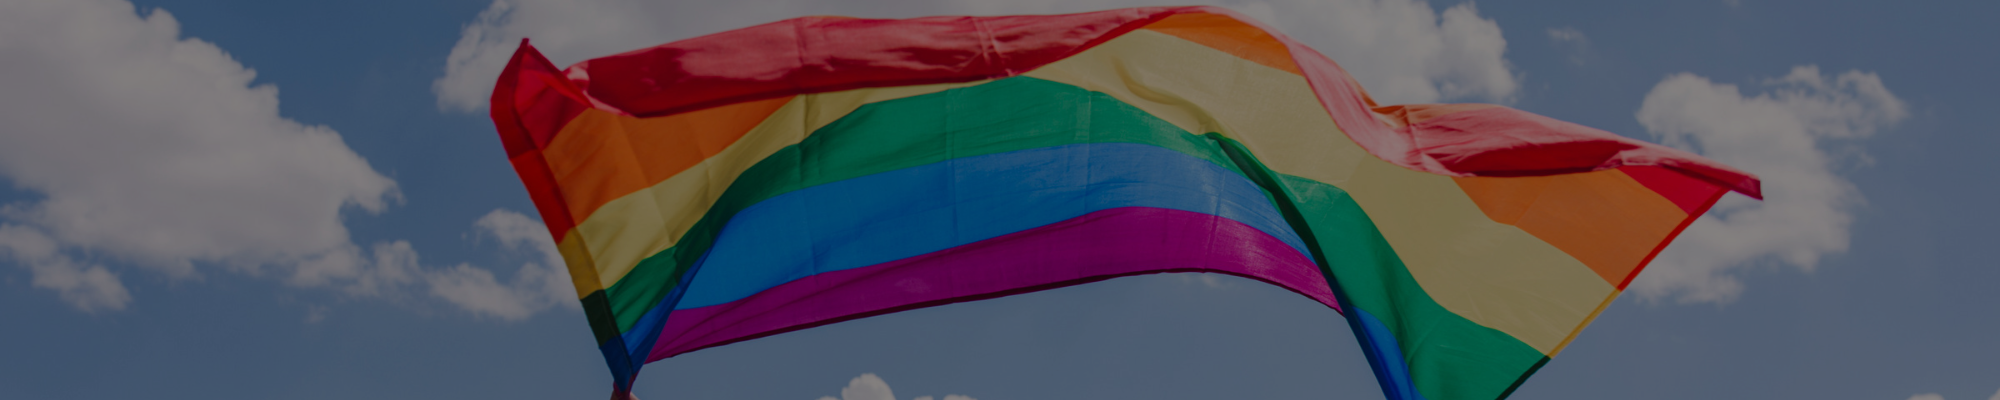 Rainbow flag with blue skies and clouds behind it.